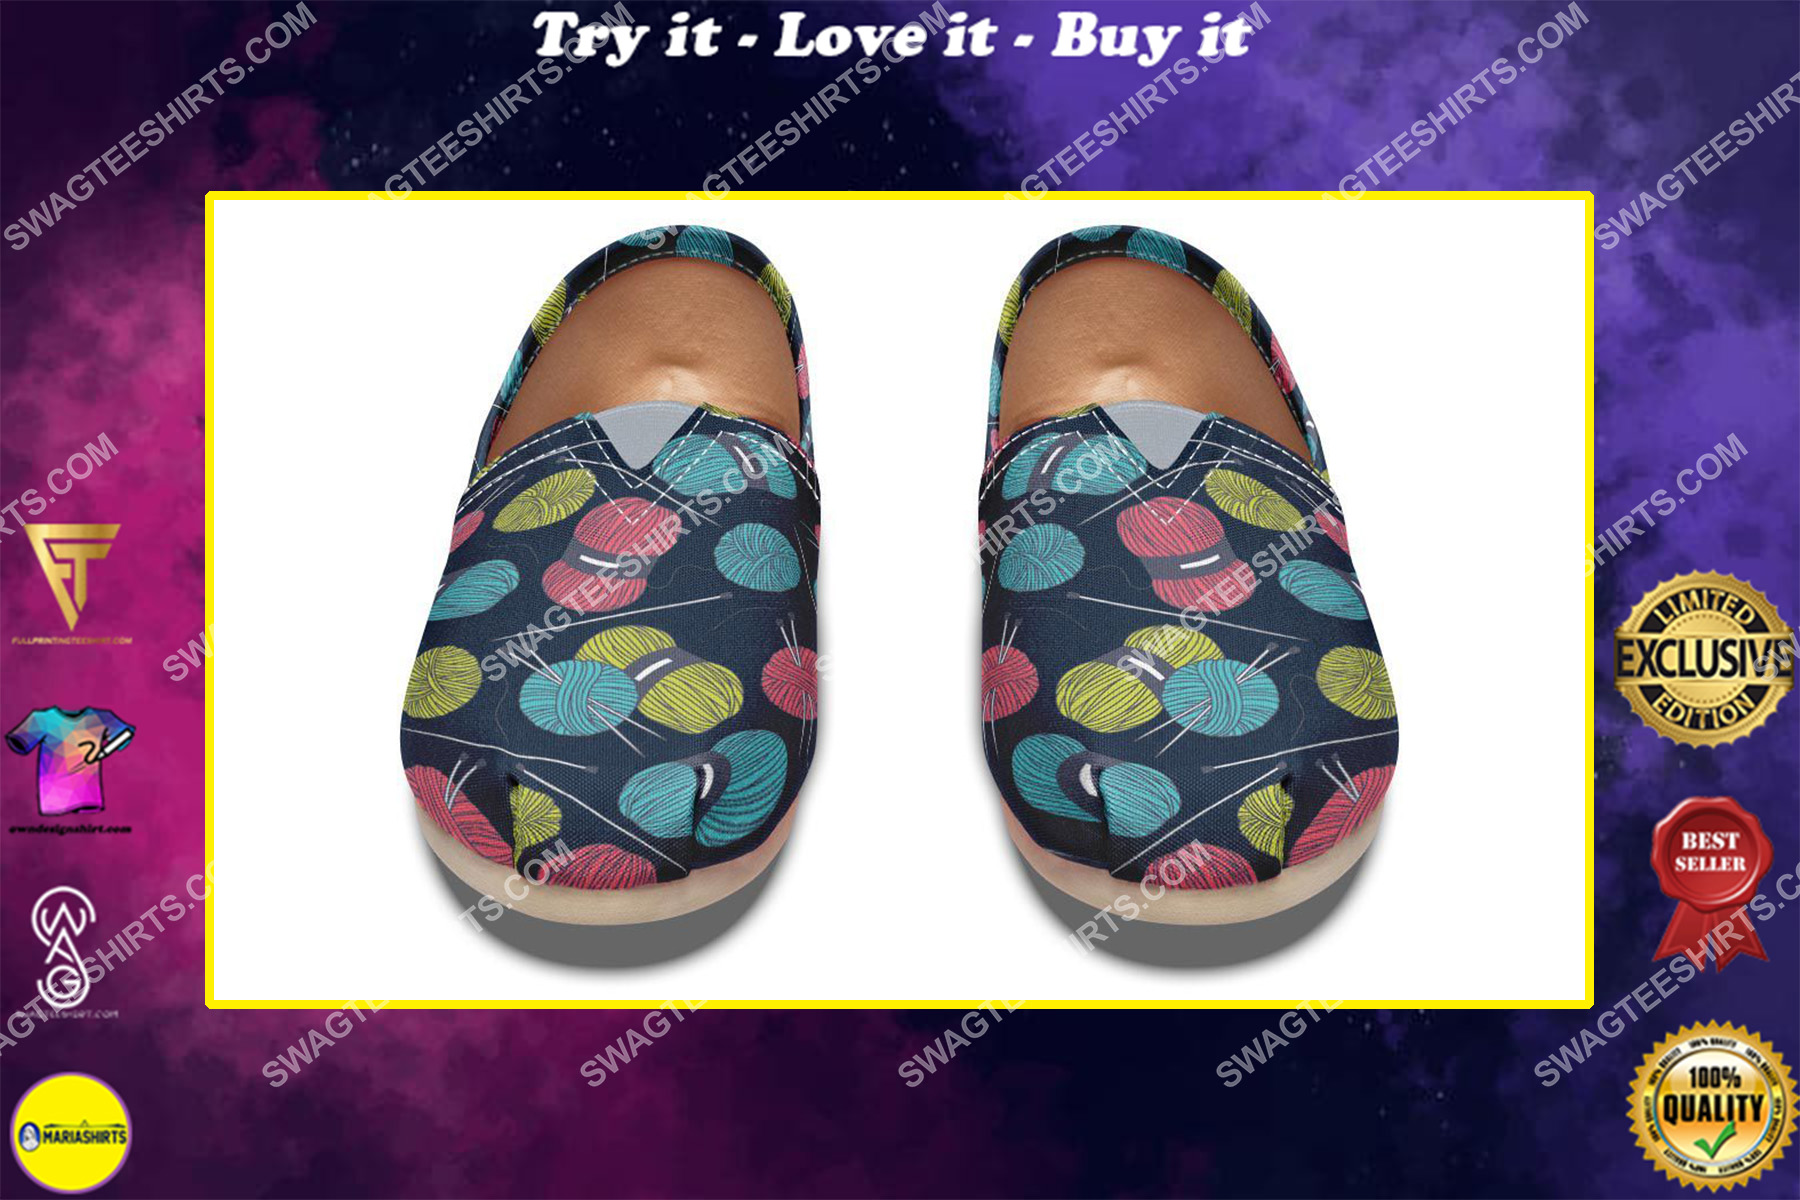 knitting lover vintage all over printed toms shoes